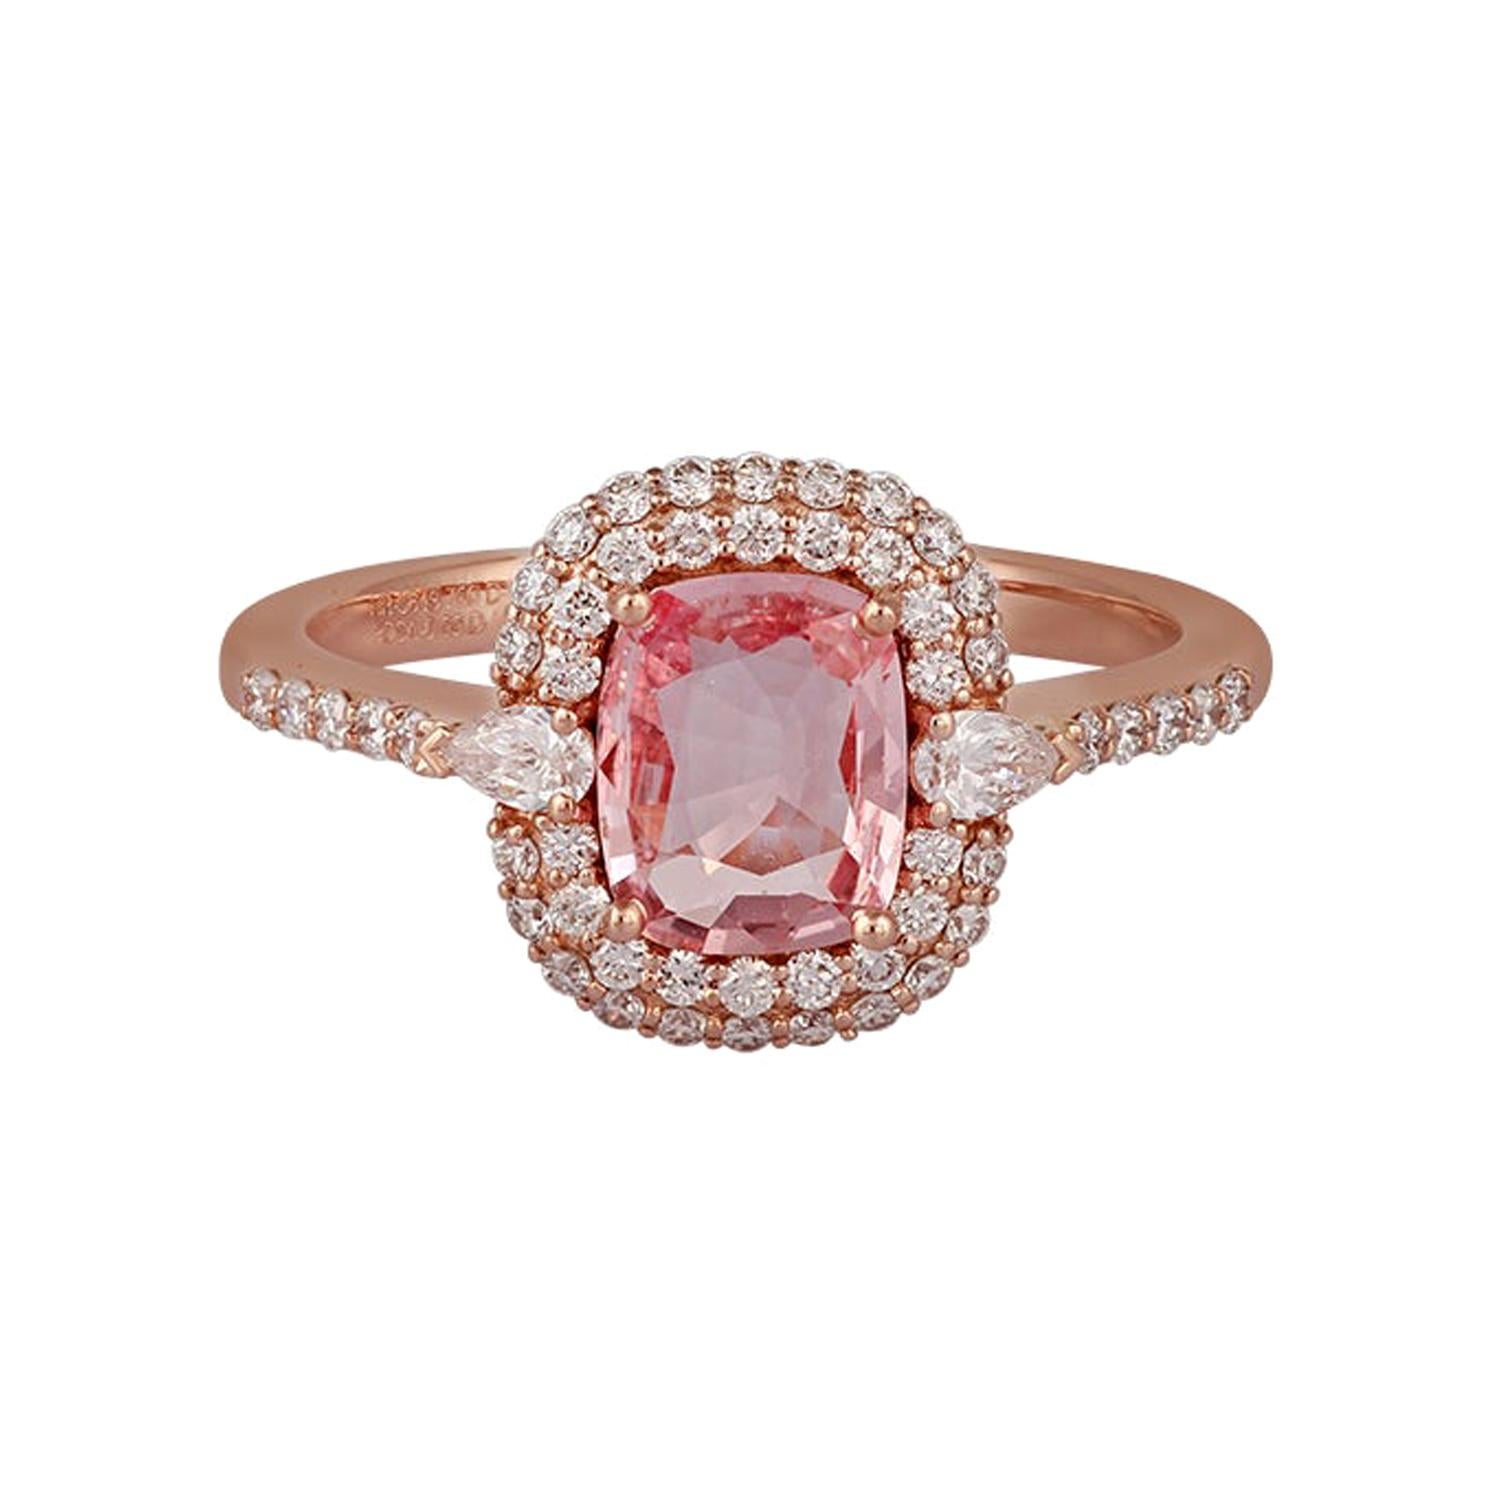 0.99 Carat Natural Padparadscha Sapphire Diamond Ring in 18 Karat Rose Gold For Sale